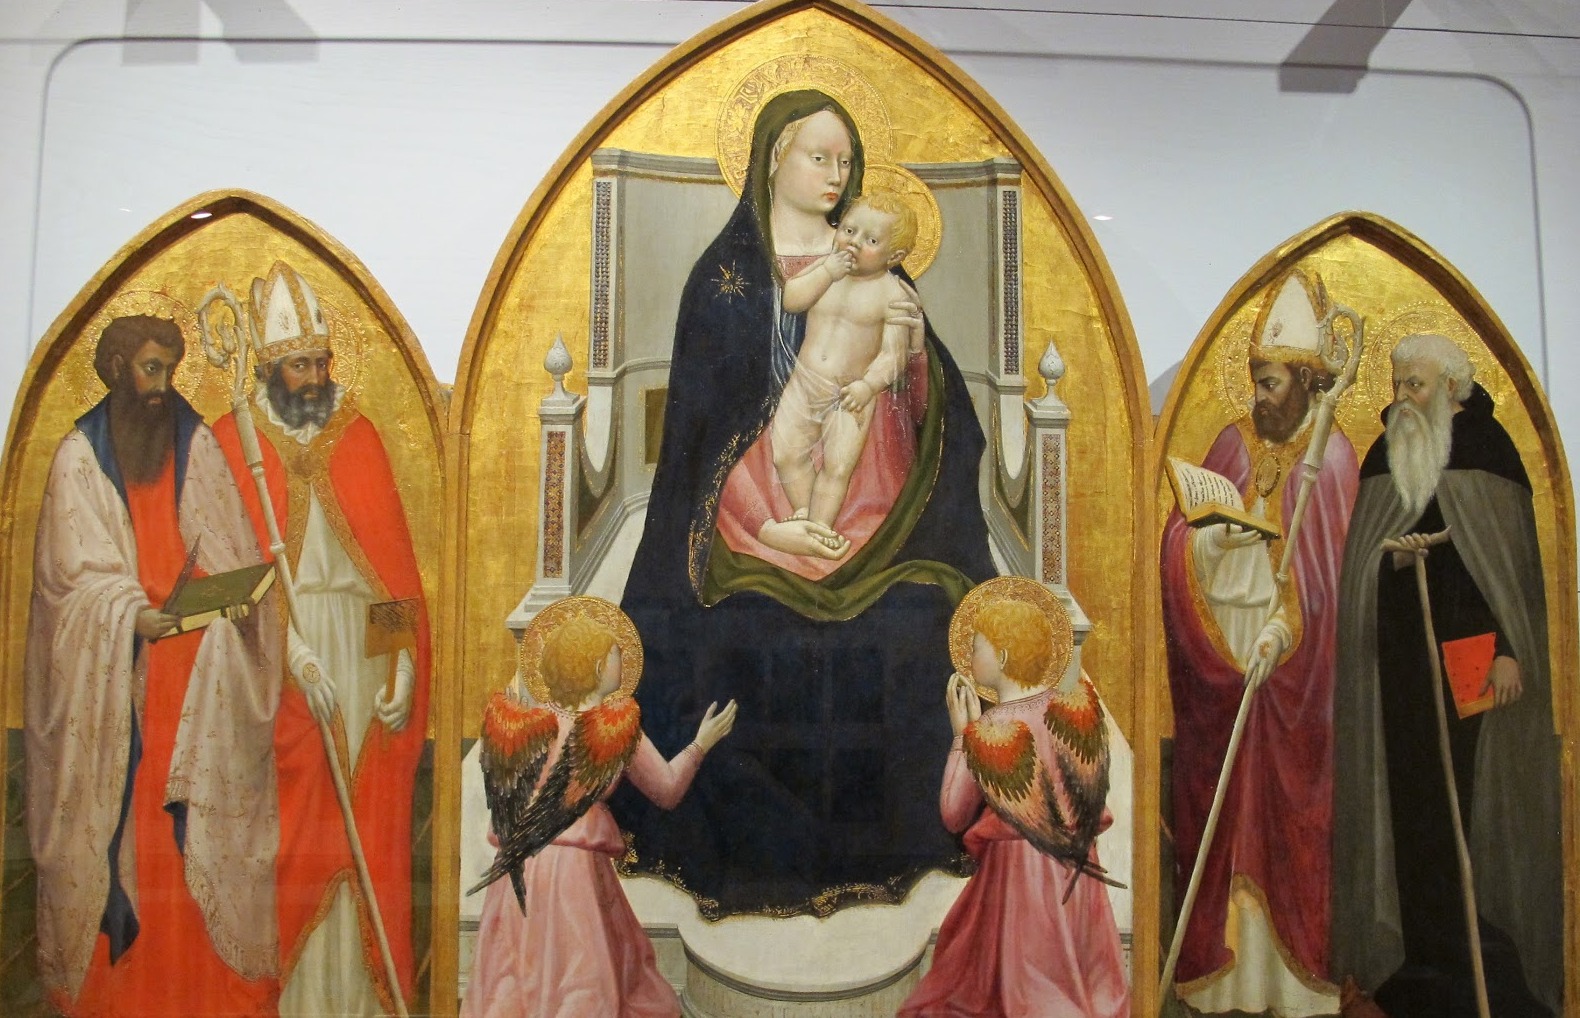 Madonna and Child with Saints by Masaccio, 1426-1428